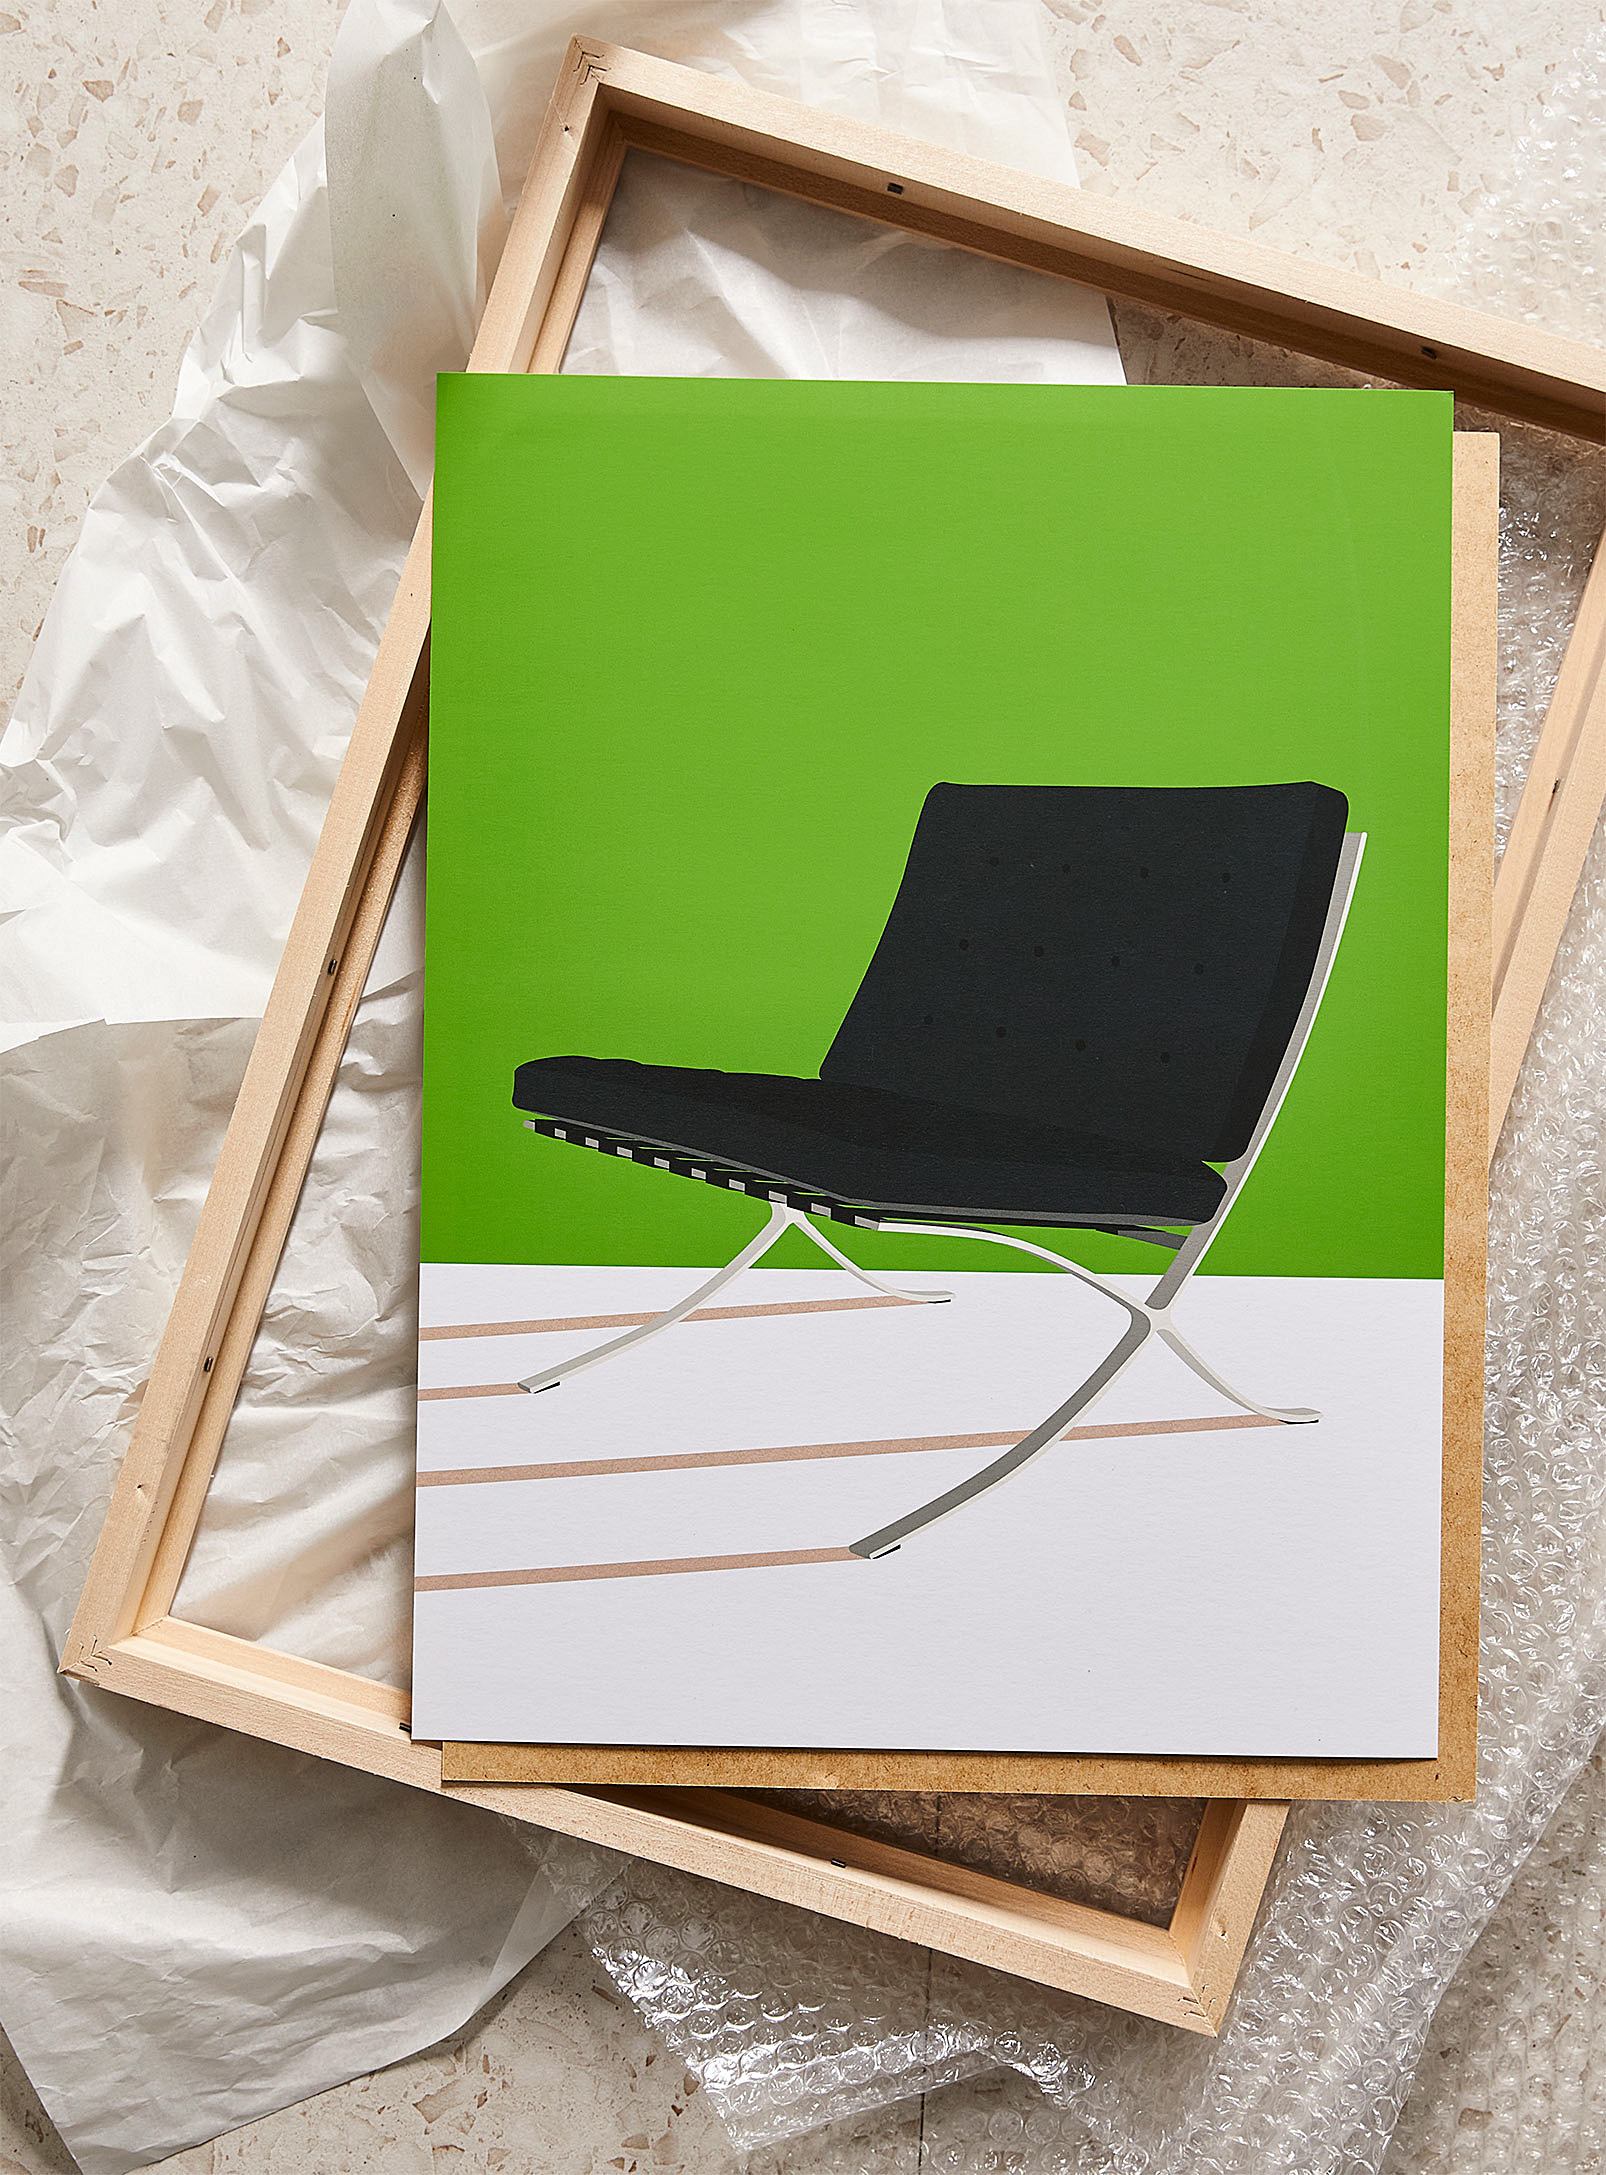 Simons Maison Barcelona Chair Art Print See Available Sizes In Green